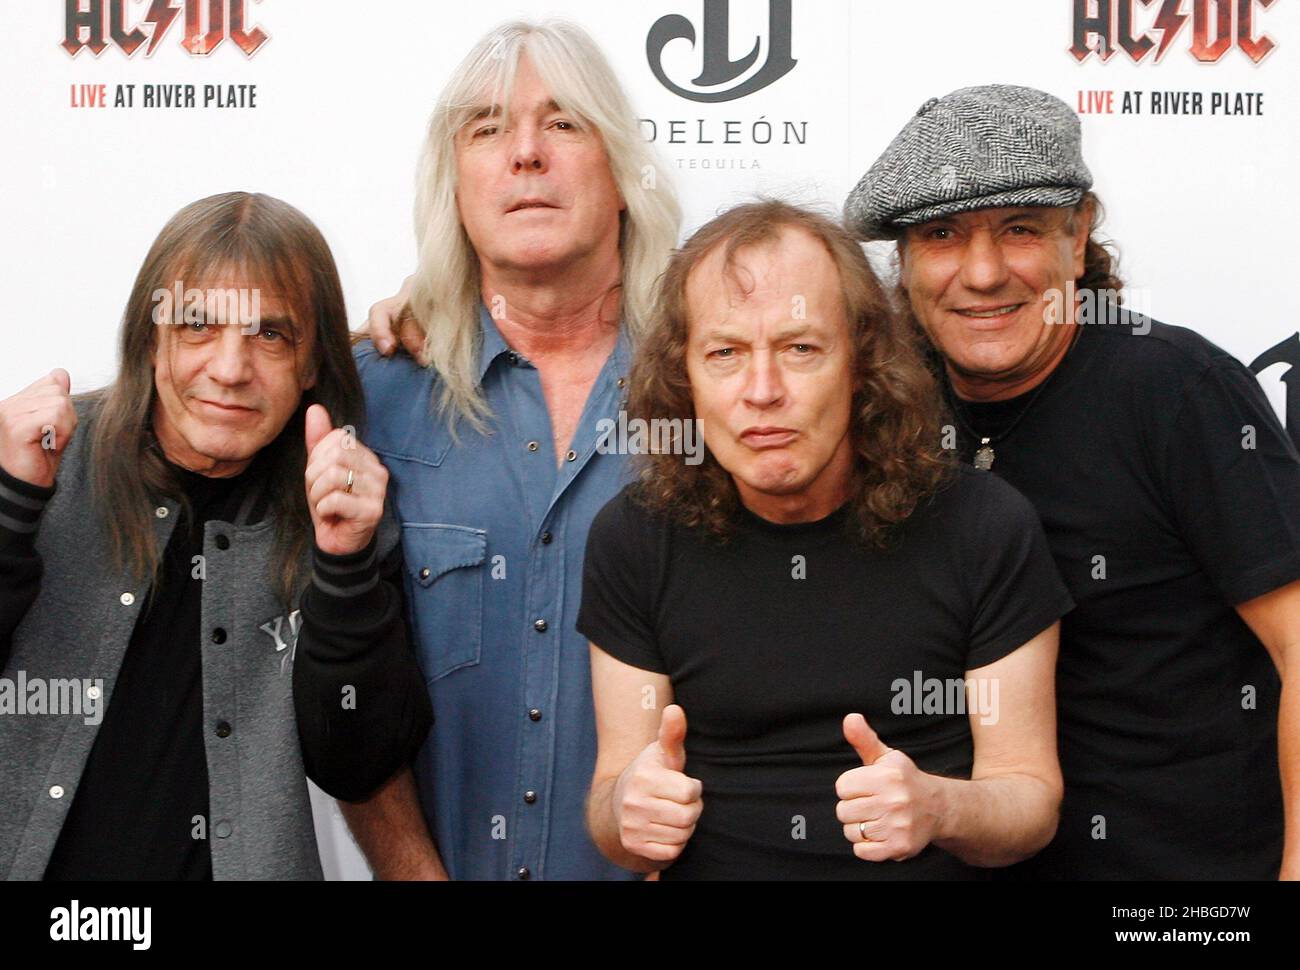 Malcolm Young, Cliff Williams, Angus Young, Brian Johnson of ACDC promote their new DVD Live at River Plate at the HMV Hammersmith Apollo in London. Stock Photo